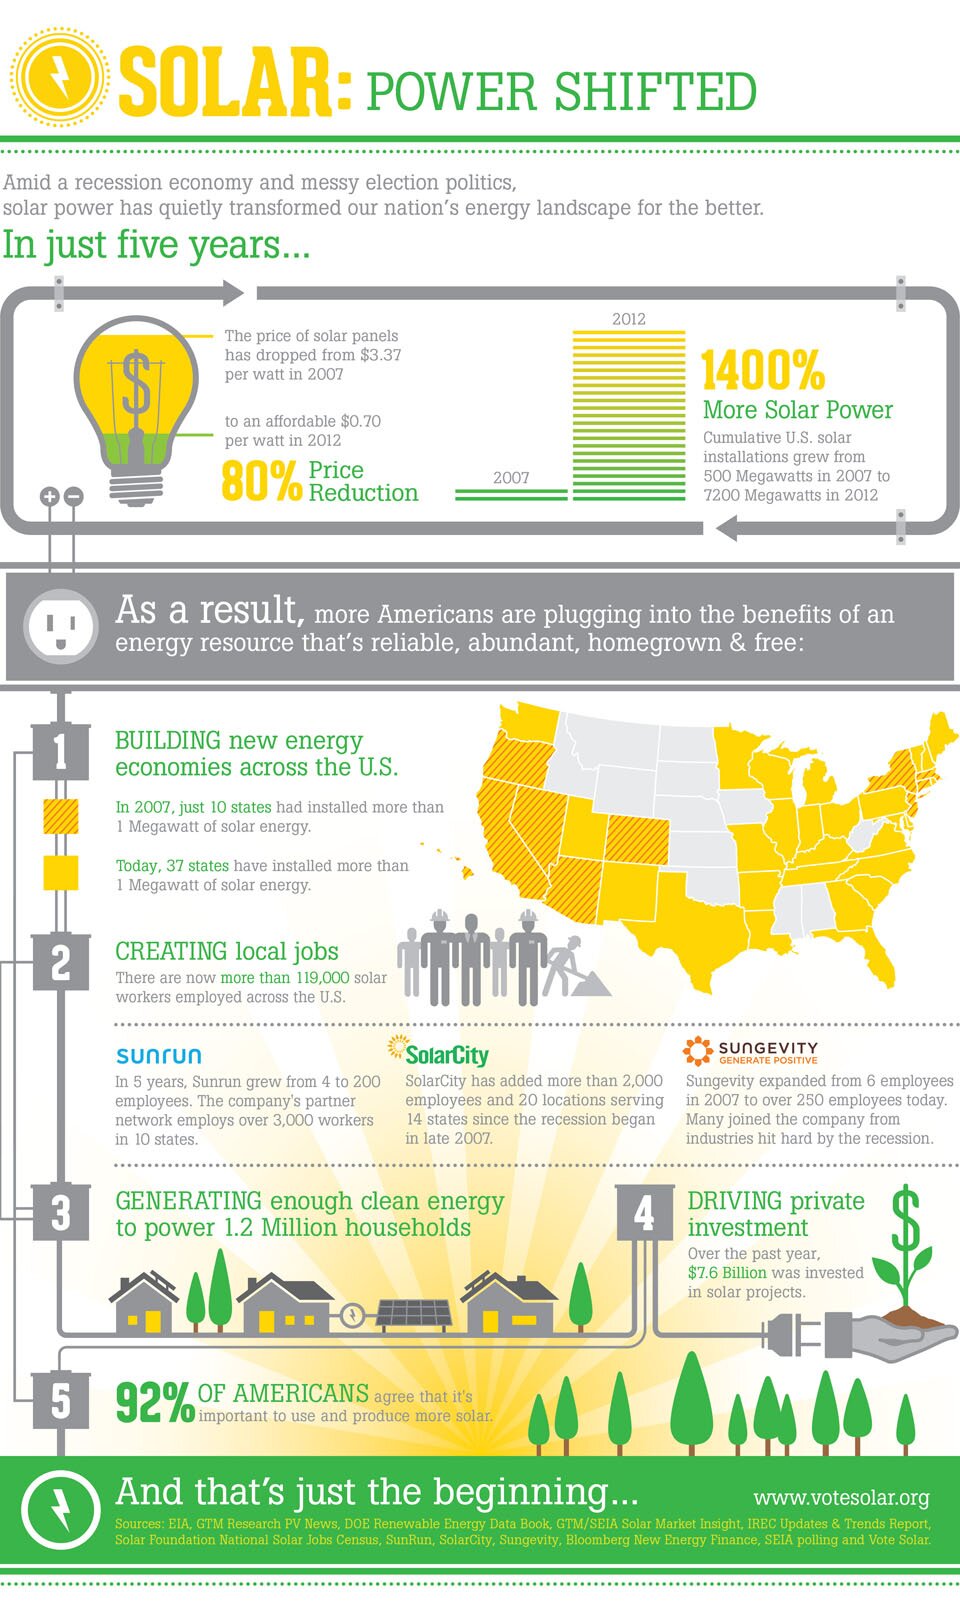 Solar Panel Power Trends in the US